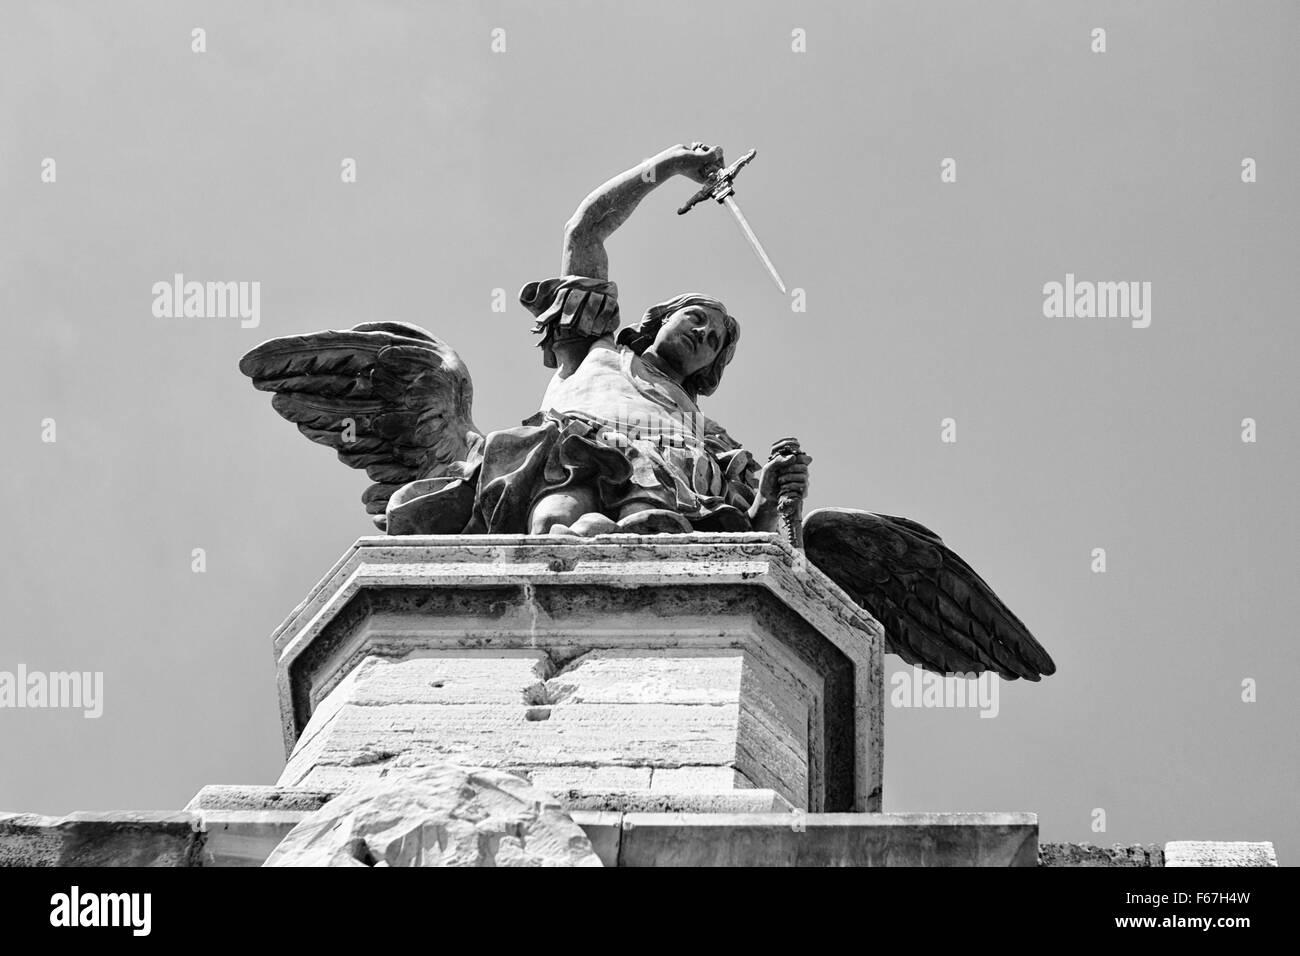 ancient bronze statue of Michael the Archangel in Rome, Italy Stock Photo